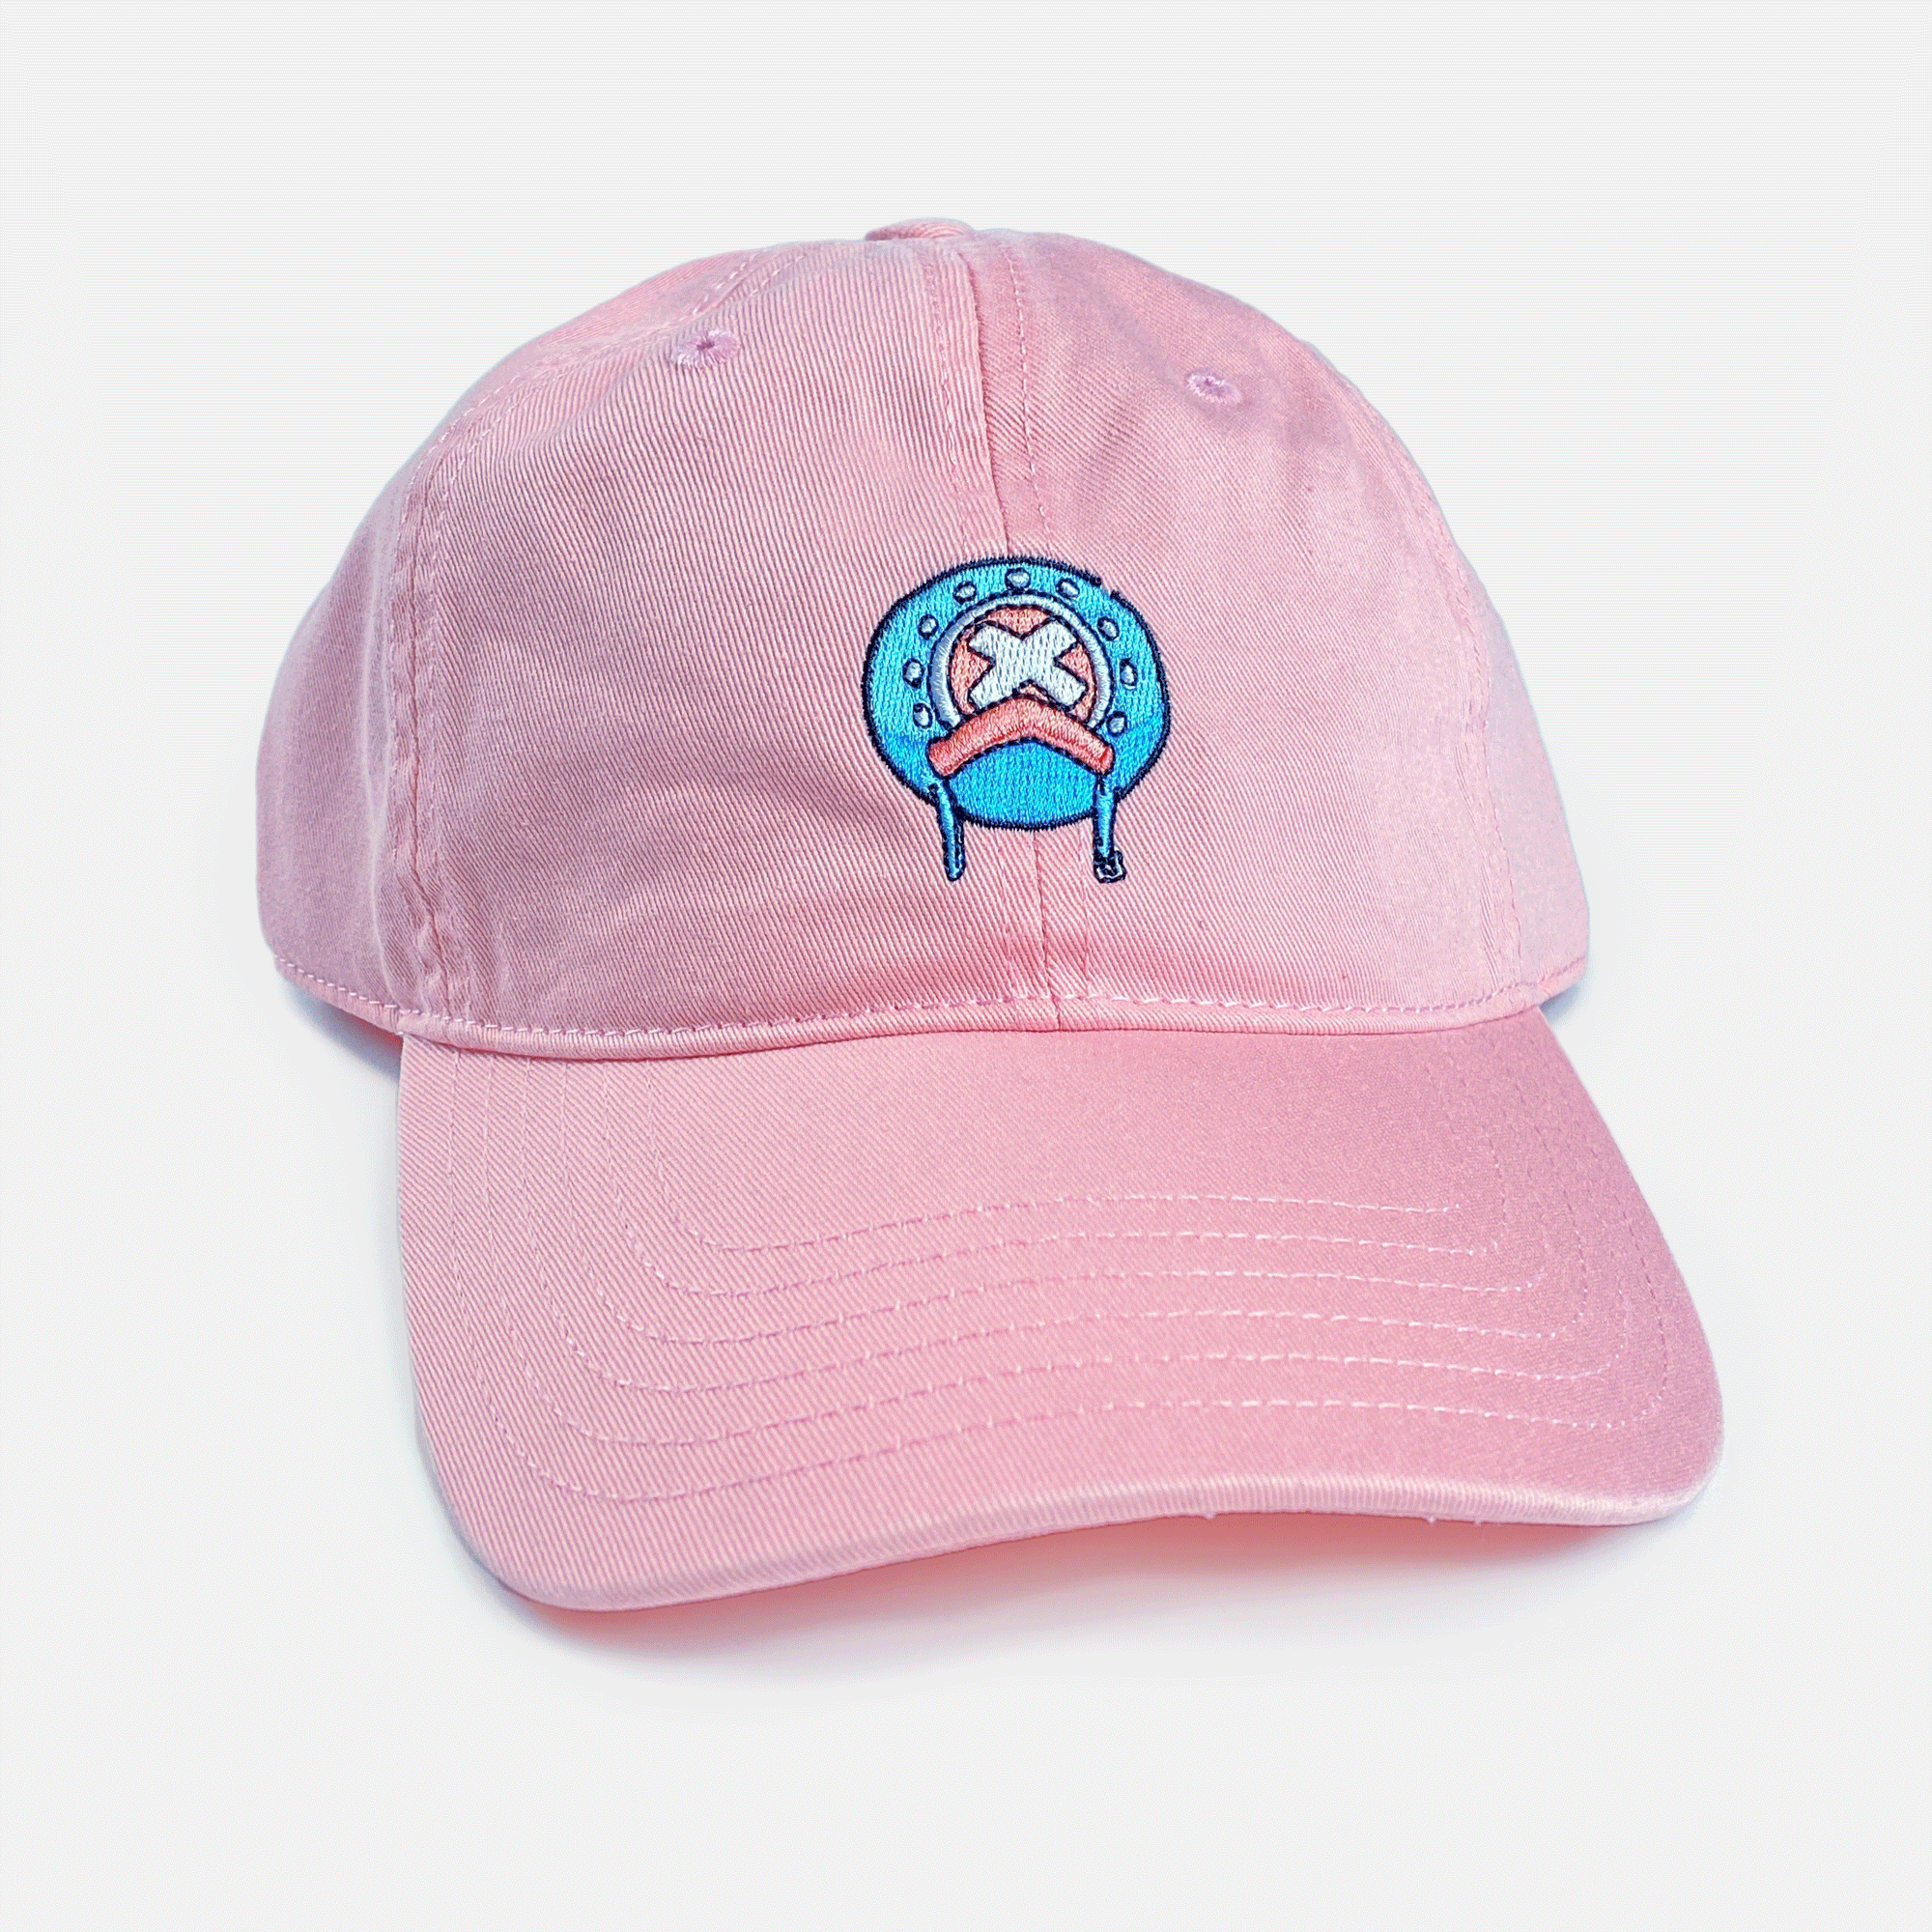 One Piece - Chopper Dad Hat image count 0